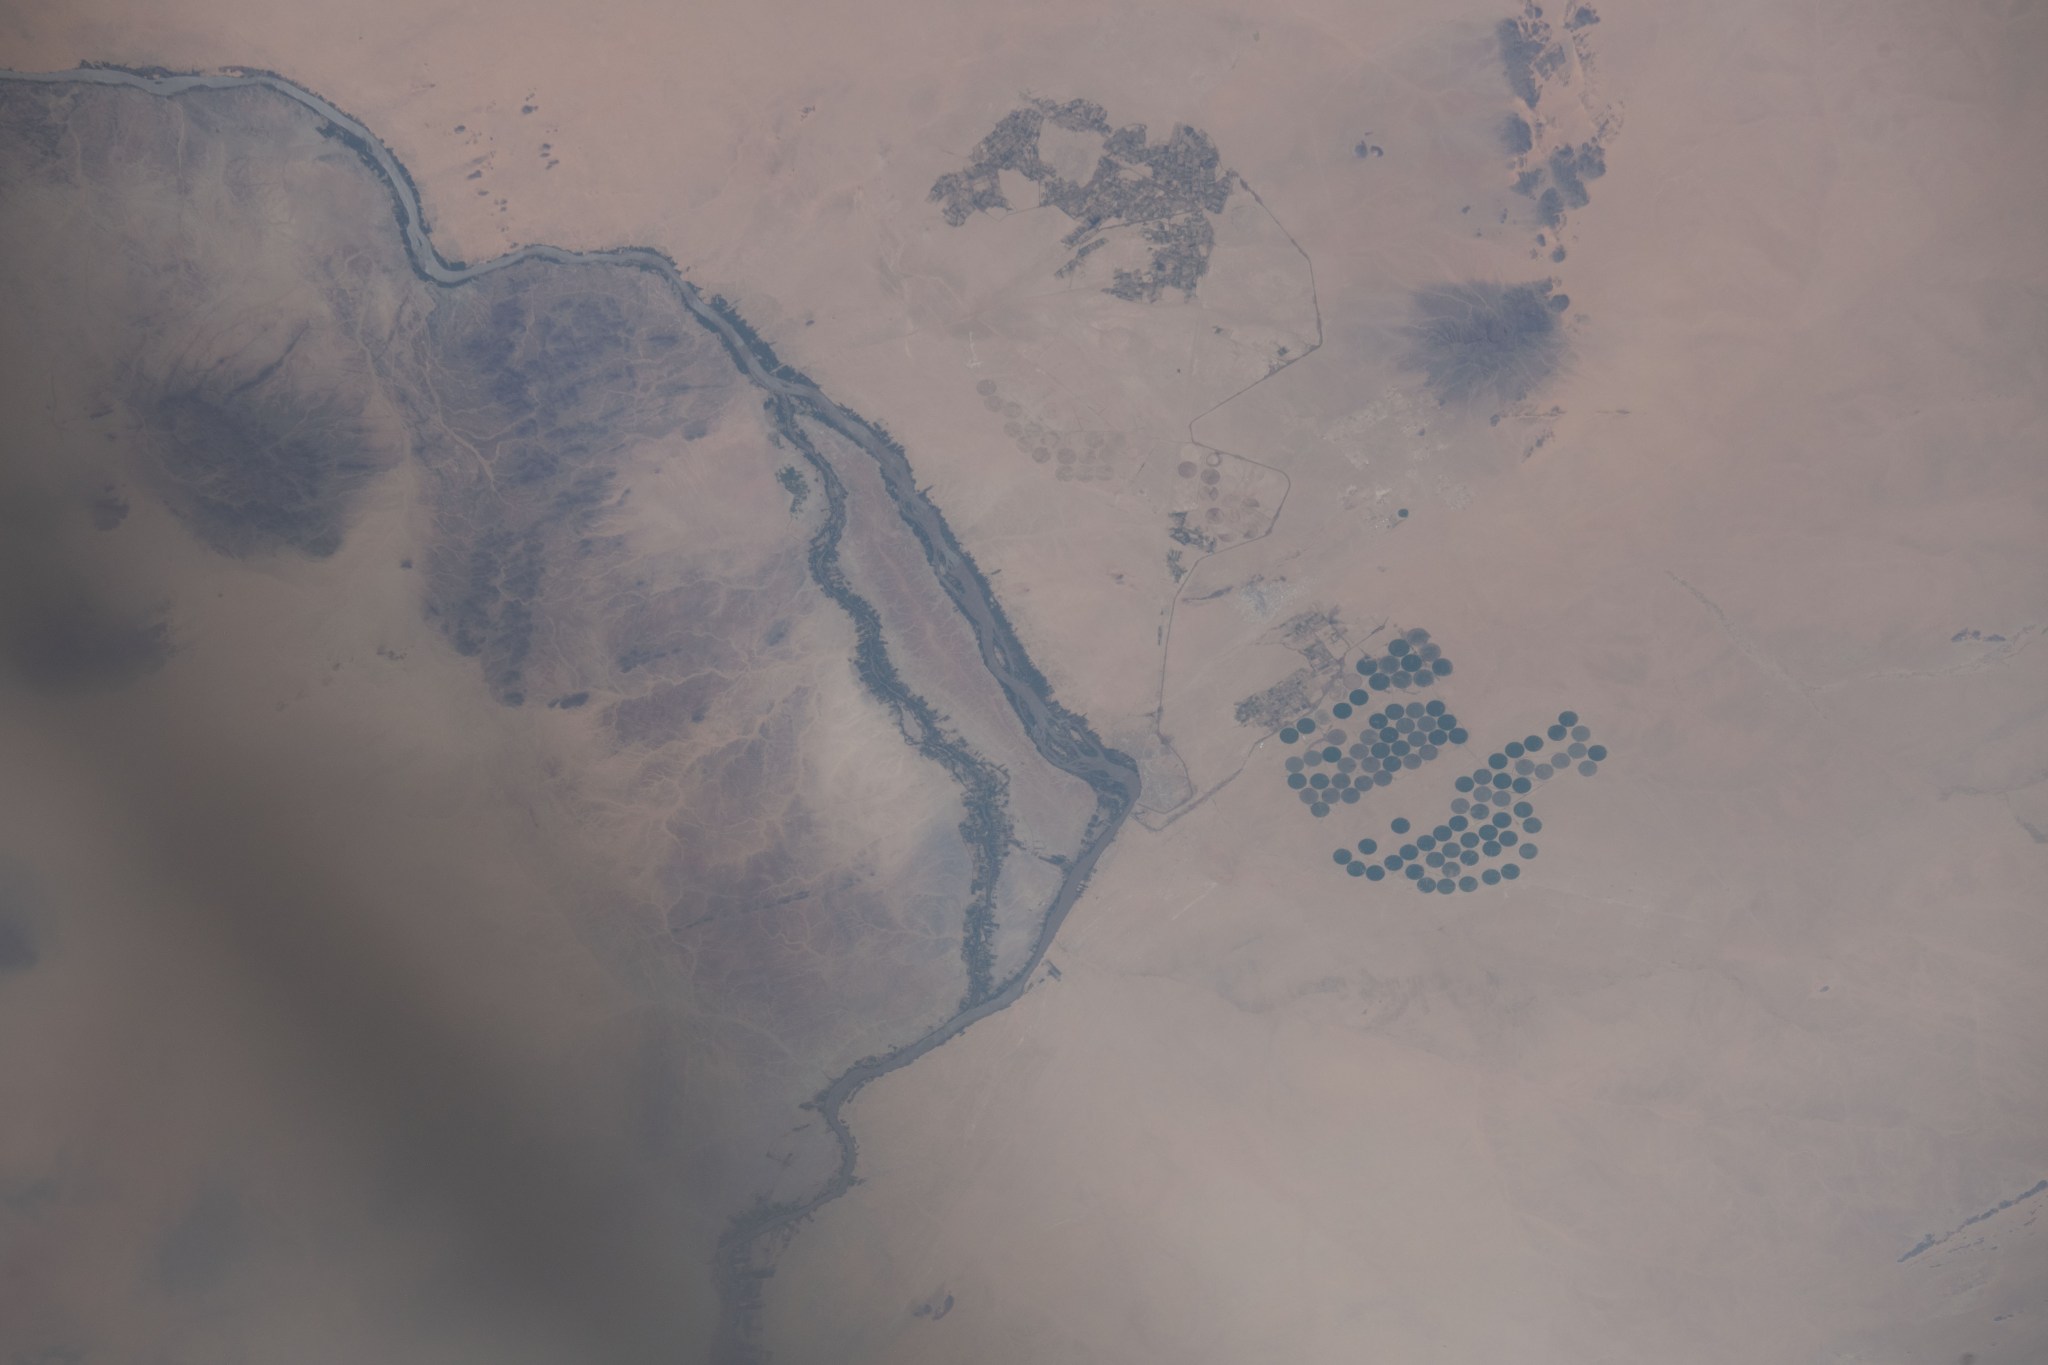 iss070e002597 (Oct. 1, 2023) -- The Nile River, the longest in the world, is photographed as the International Space Station orbited 260 miles above Sudan. Land splits the historic course of the river in two channels before the body of water joins back together. To the right of the image, crop circles are visible. A result of center-pivot irrigation, these circular farming patterns create an efficient method for water conservation while growing crops such as sesame, peanuts, and sugarcane.